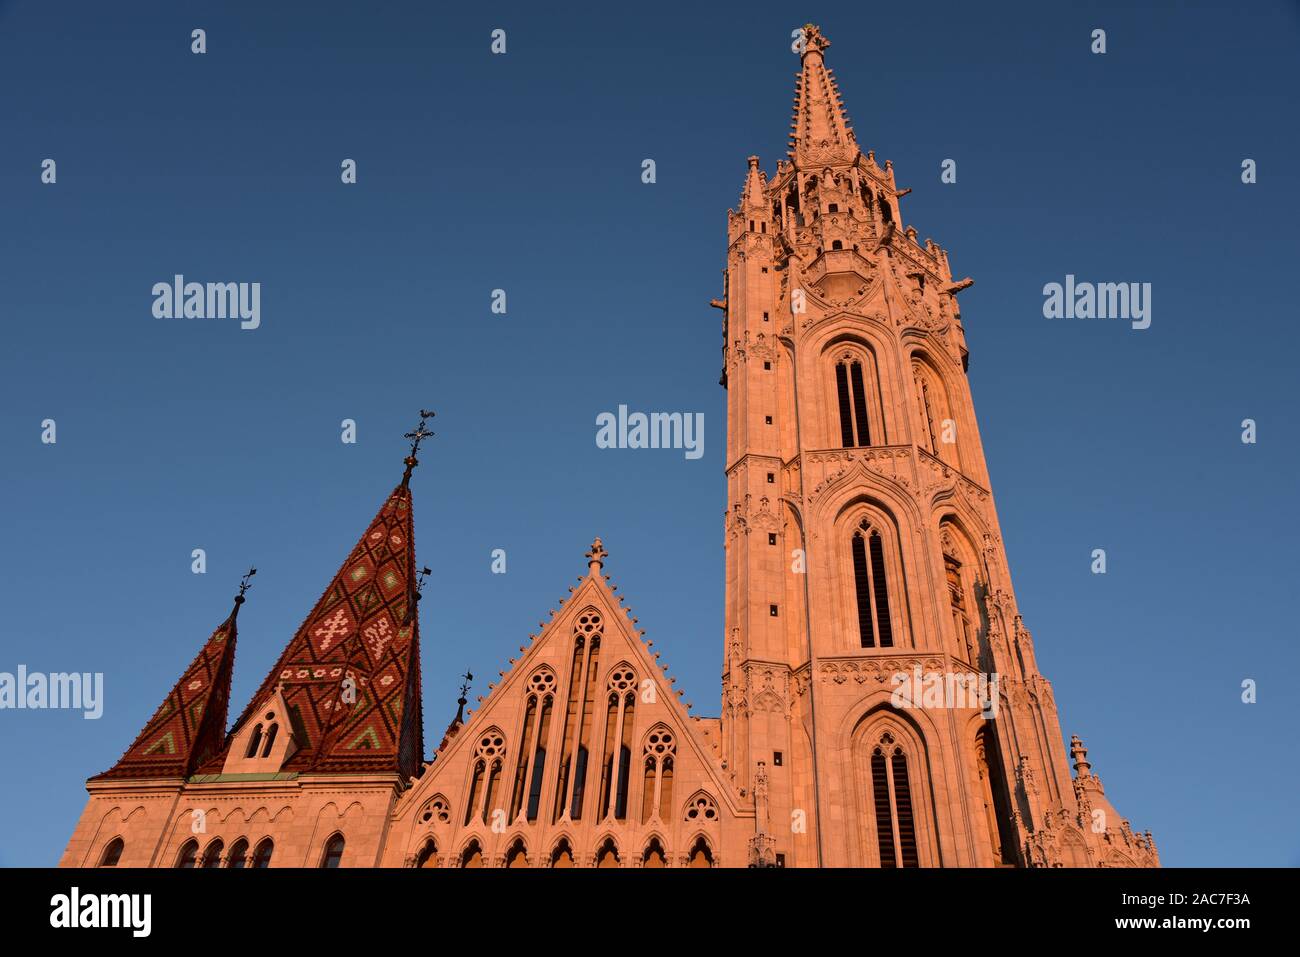 The spire and rooftop of Mátyás Church bask in the glorious late afternoon sun, Castle District, Budapest, Hungary, Europe. Stock Photo